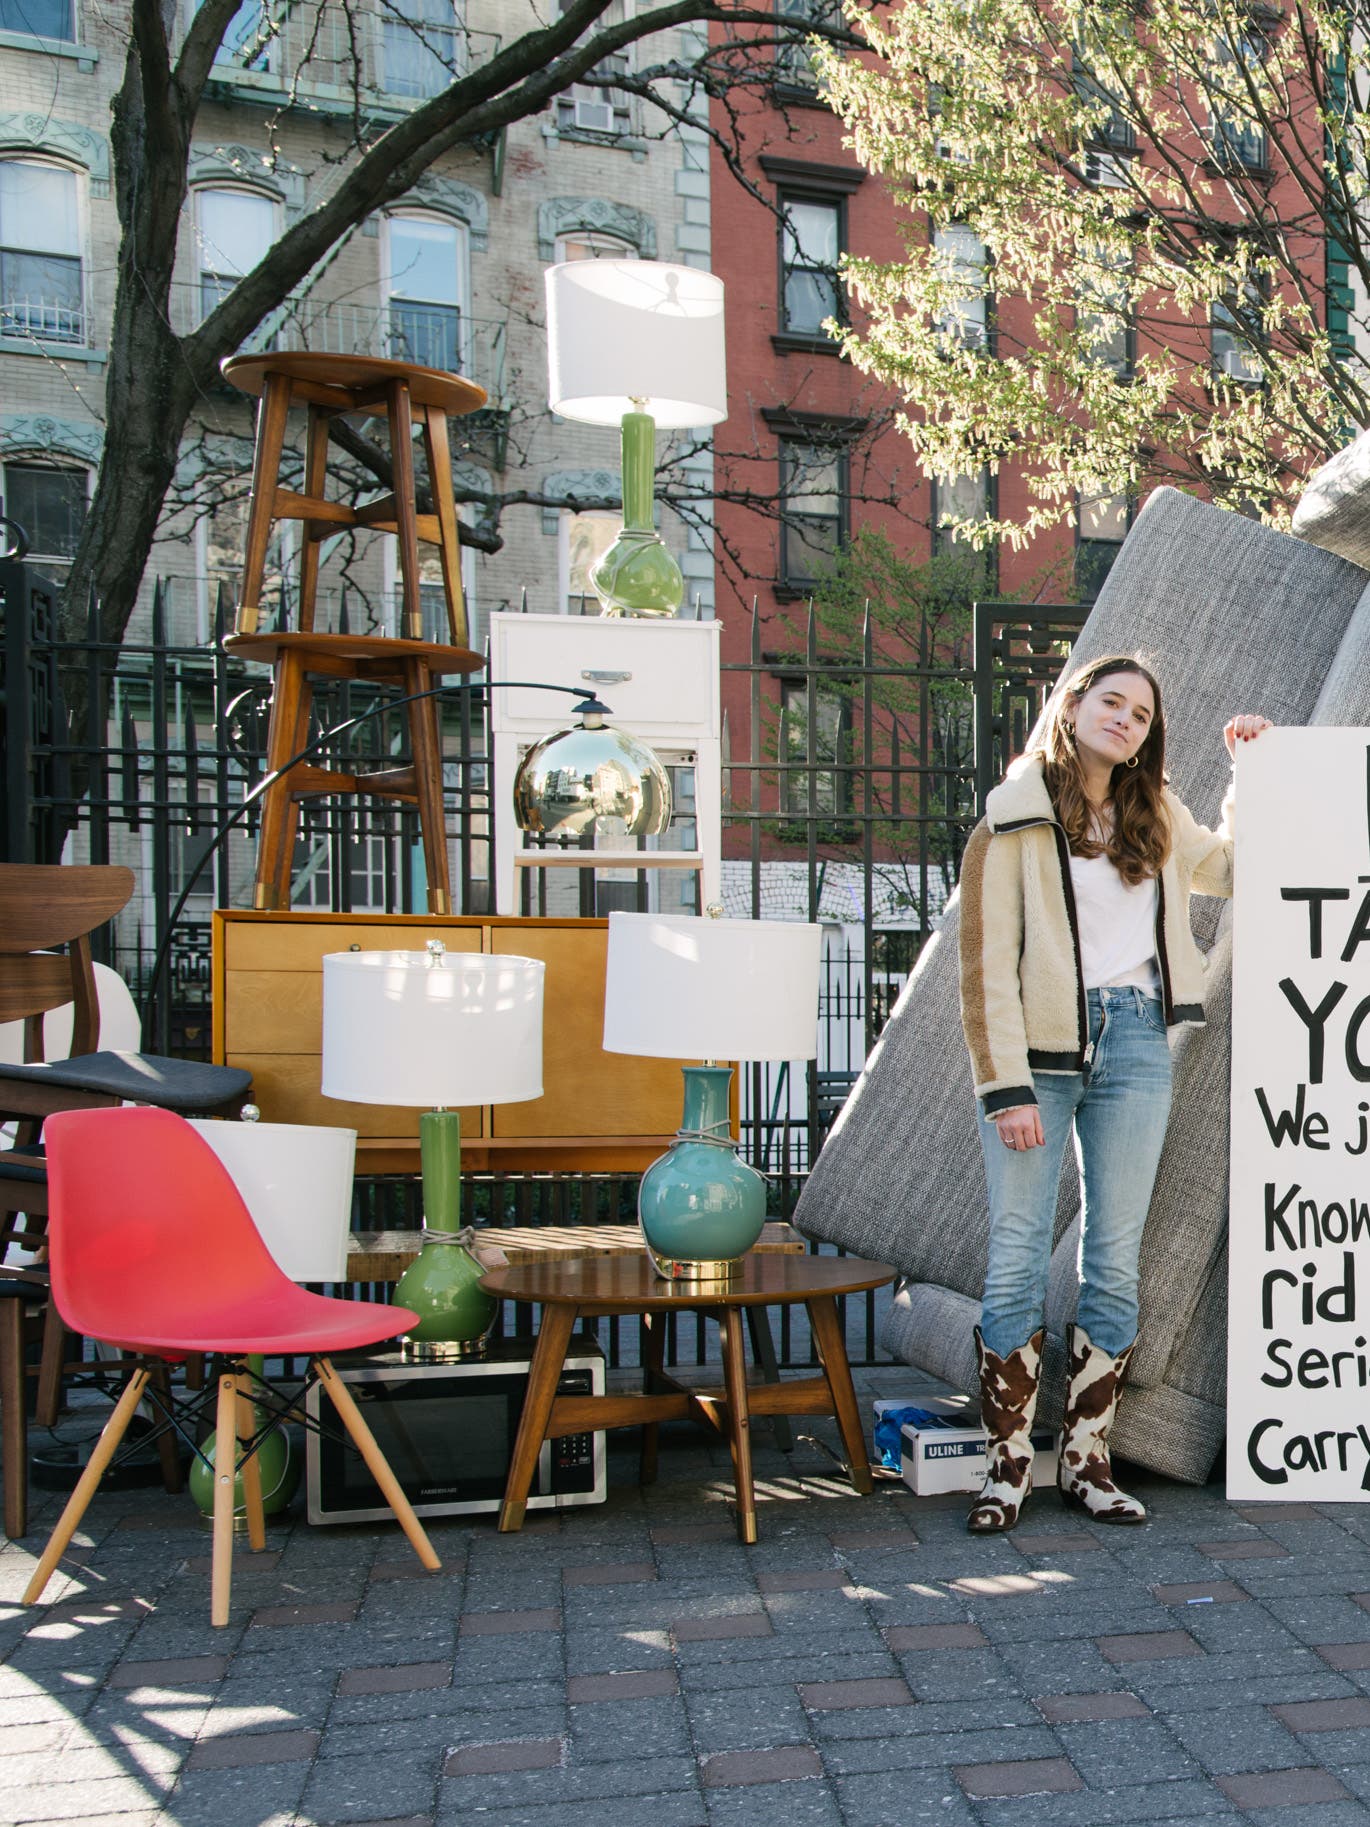 Heads-Up: The Furniture You Tossed to the Curb Might Just Become a Work of Art